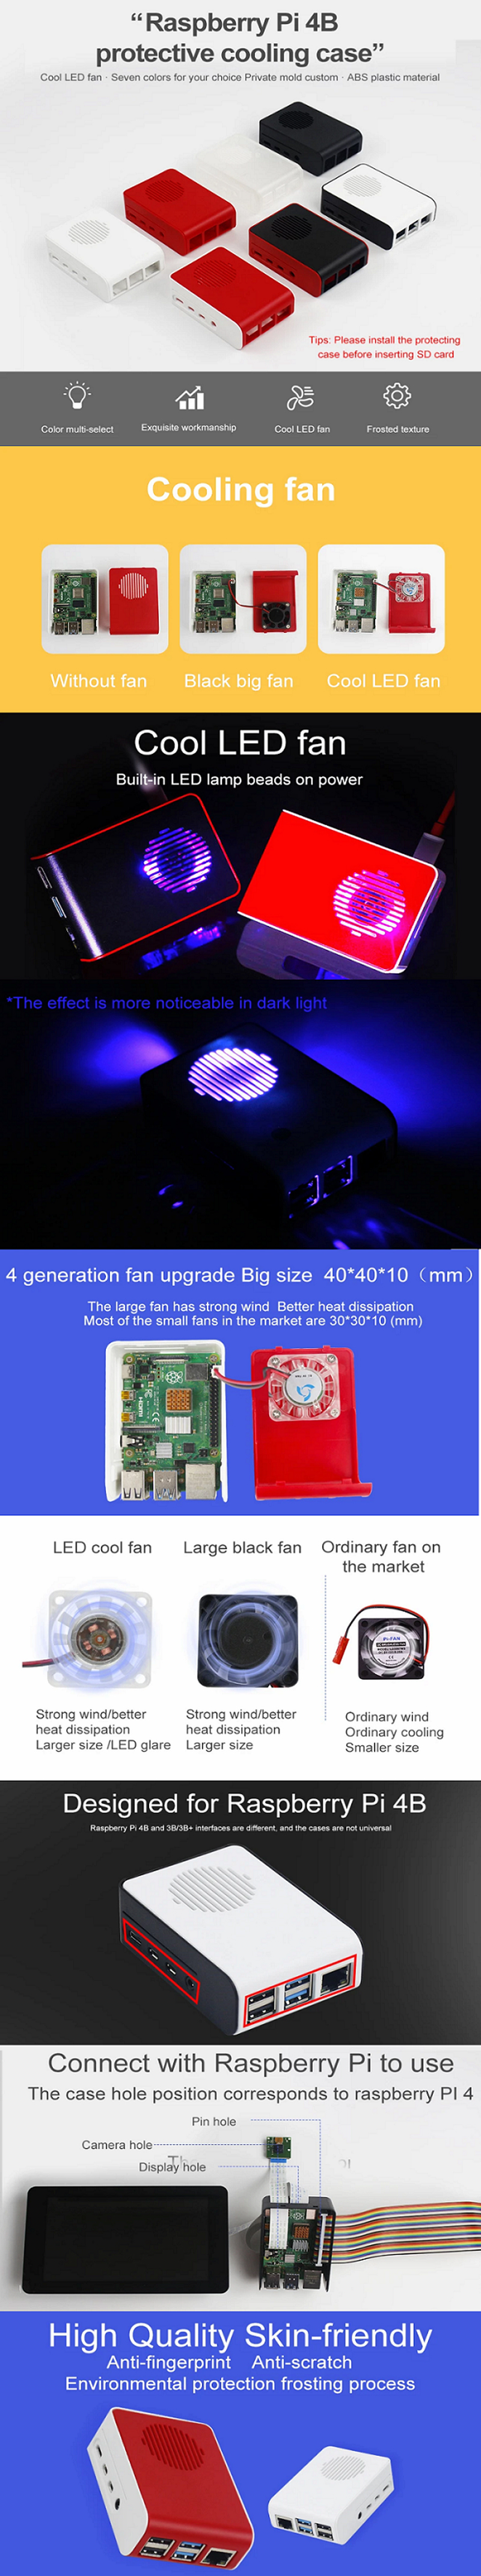 Yahboom-ABS-Protective-Case-with-Cooling-Fan-Version-for-Raspberry-Pi-4B-1617052